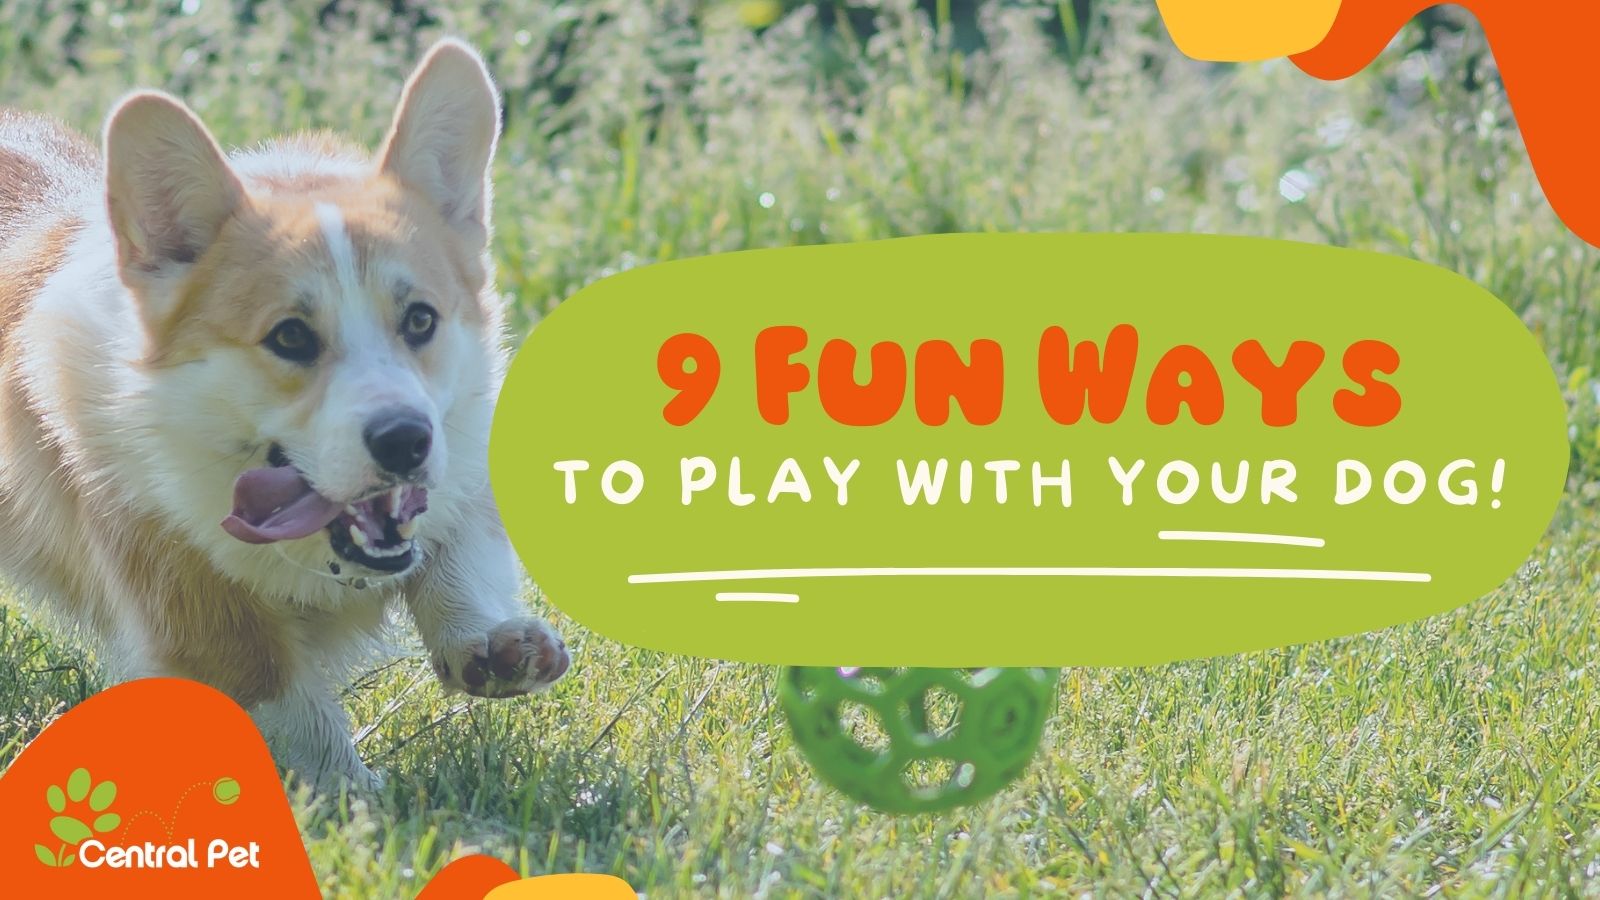 9 Fun Ways to Play with Your Dog